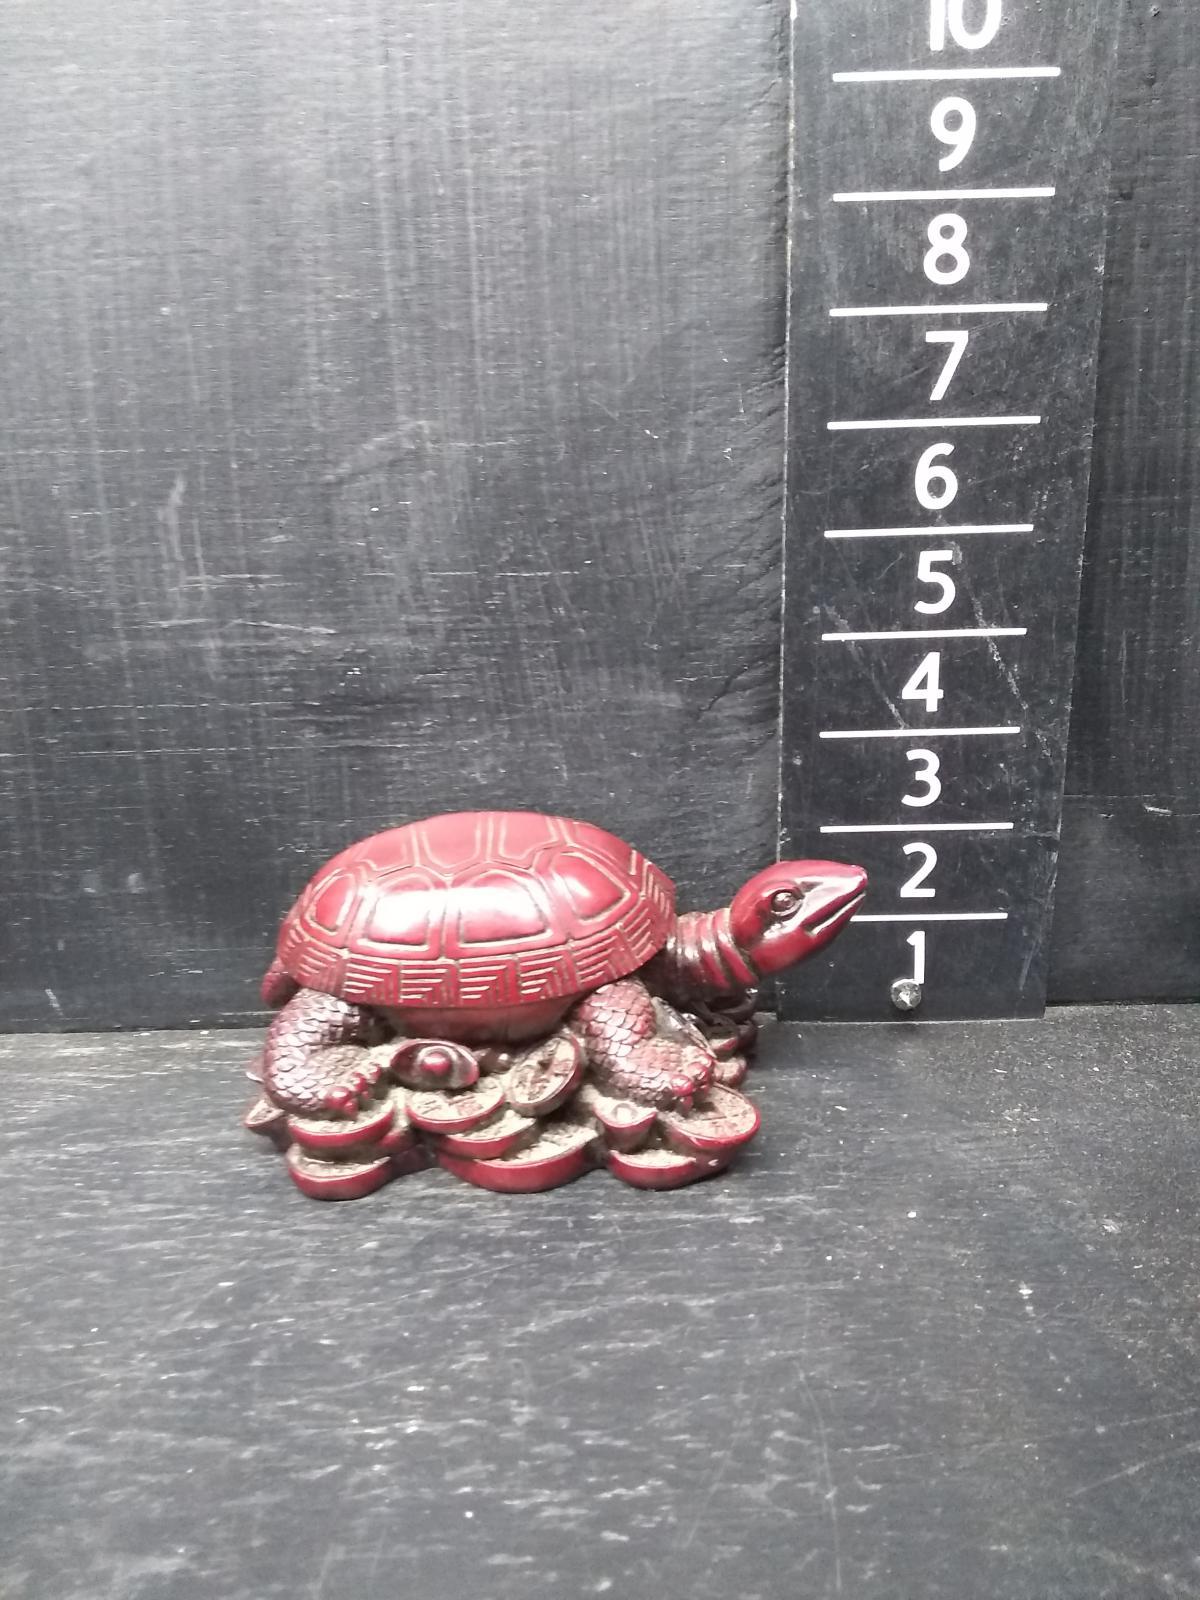 Chinese Red Resin Luck Turtle